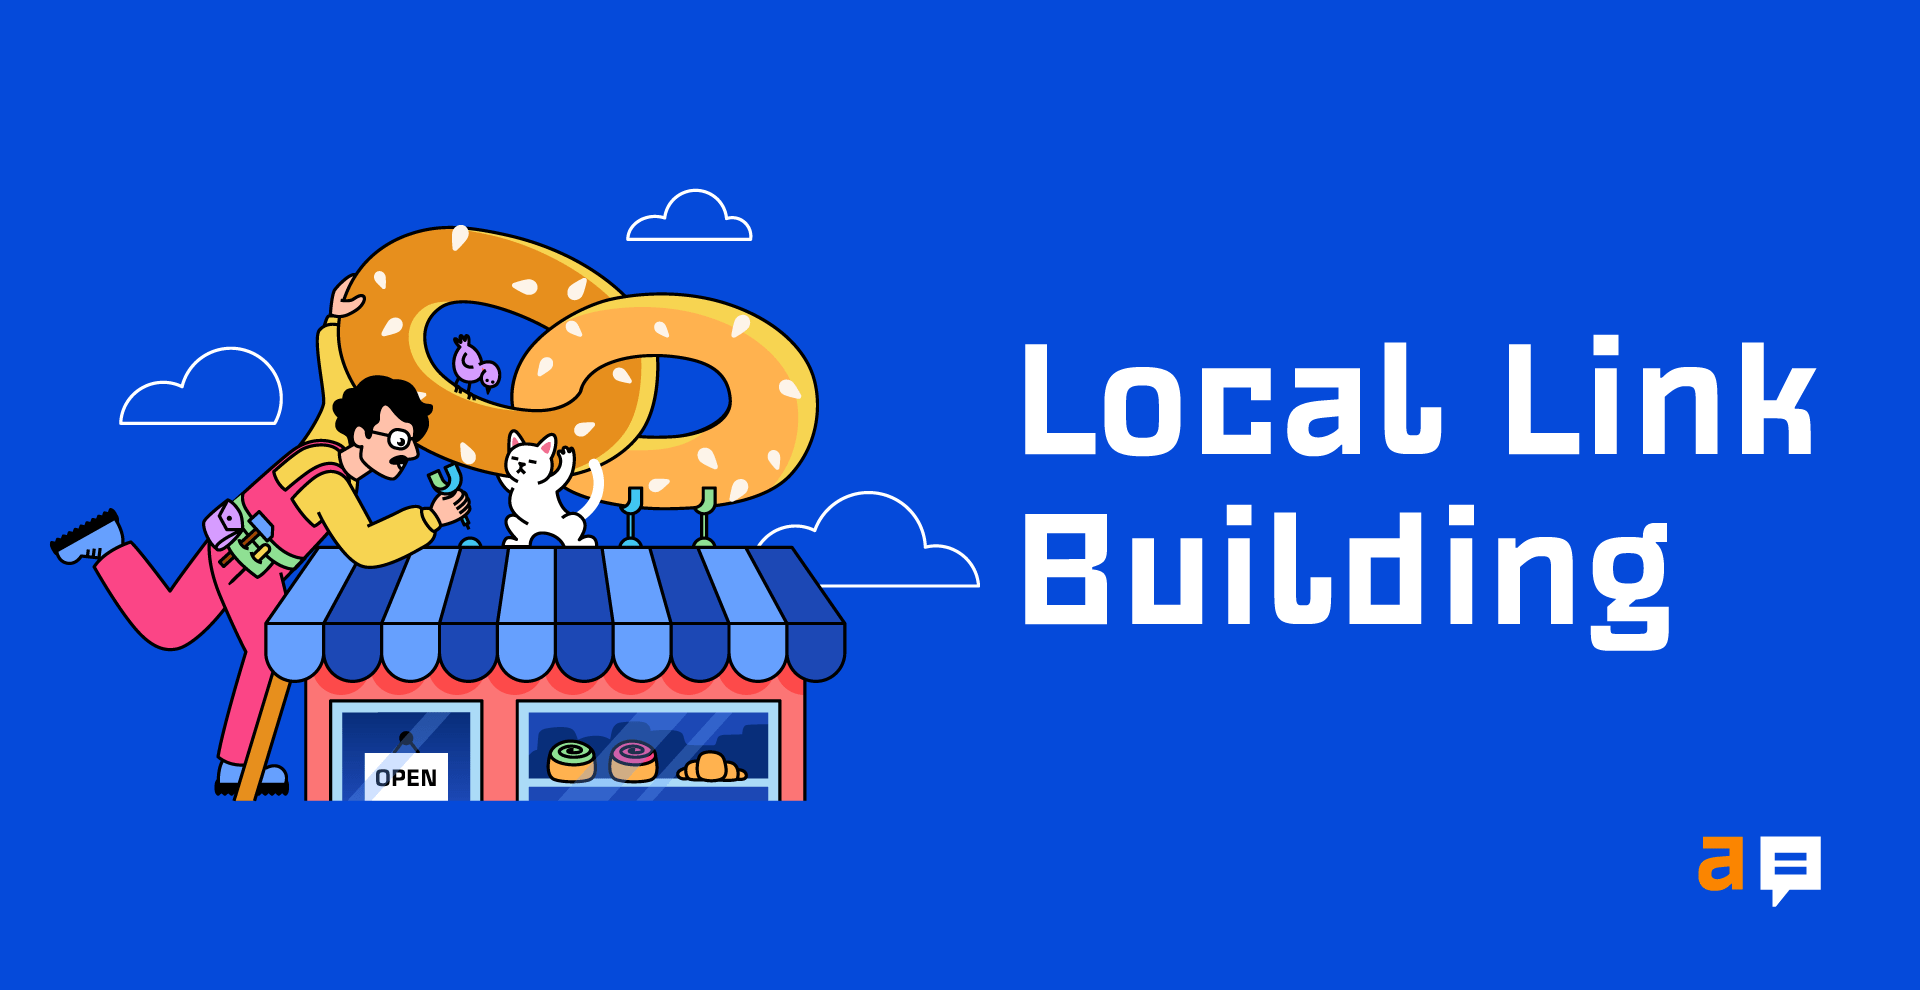 Local Links Made Easy